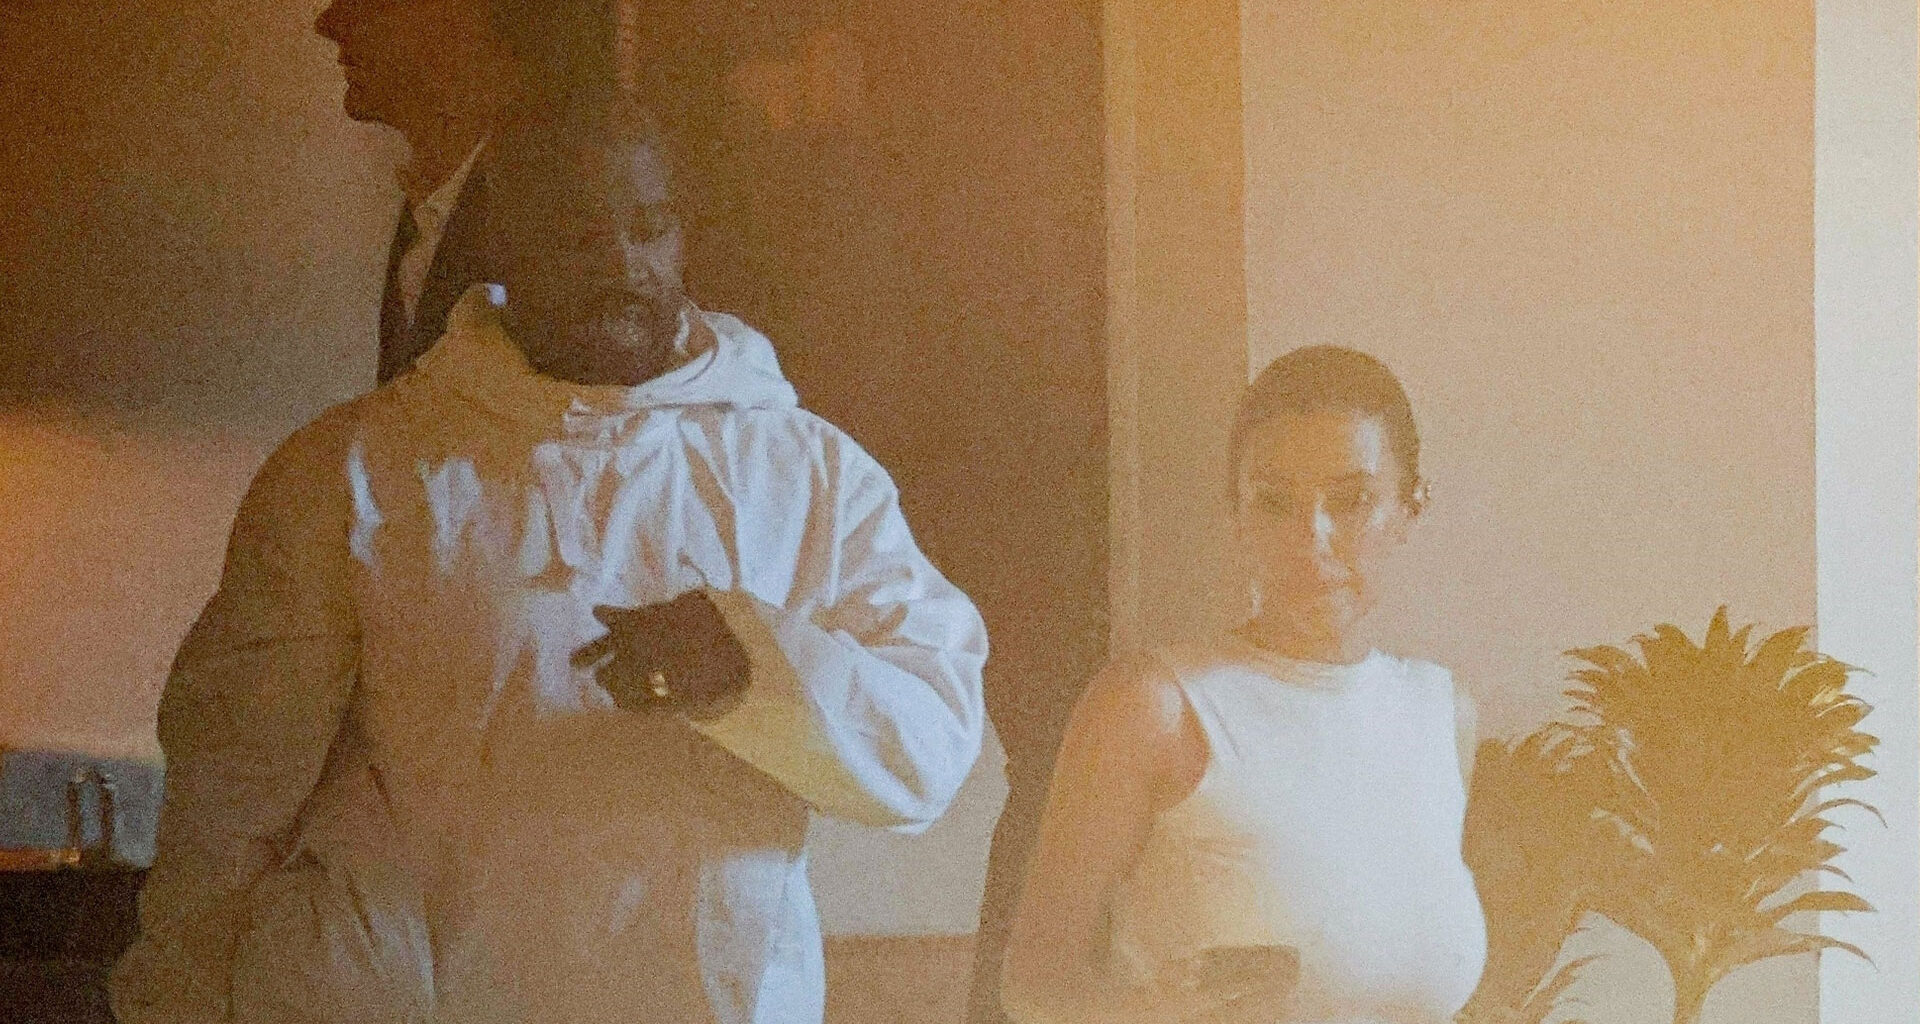 Bianca Censori wears tiny hotpants and tight top during date night with husband Kanye West as couple match in all-white